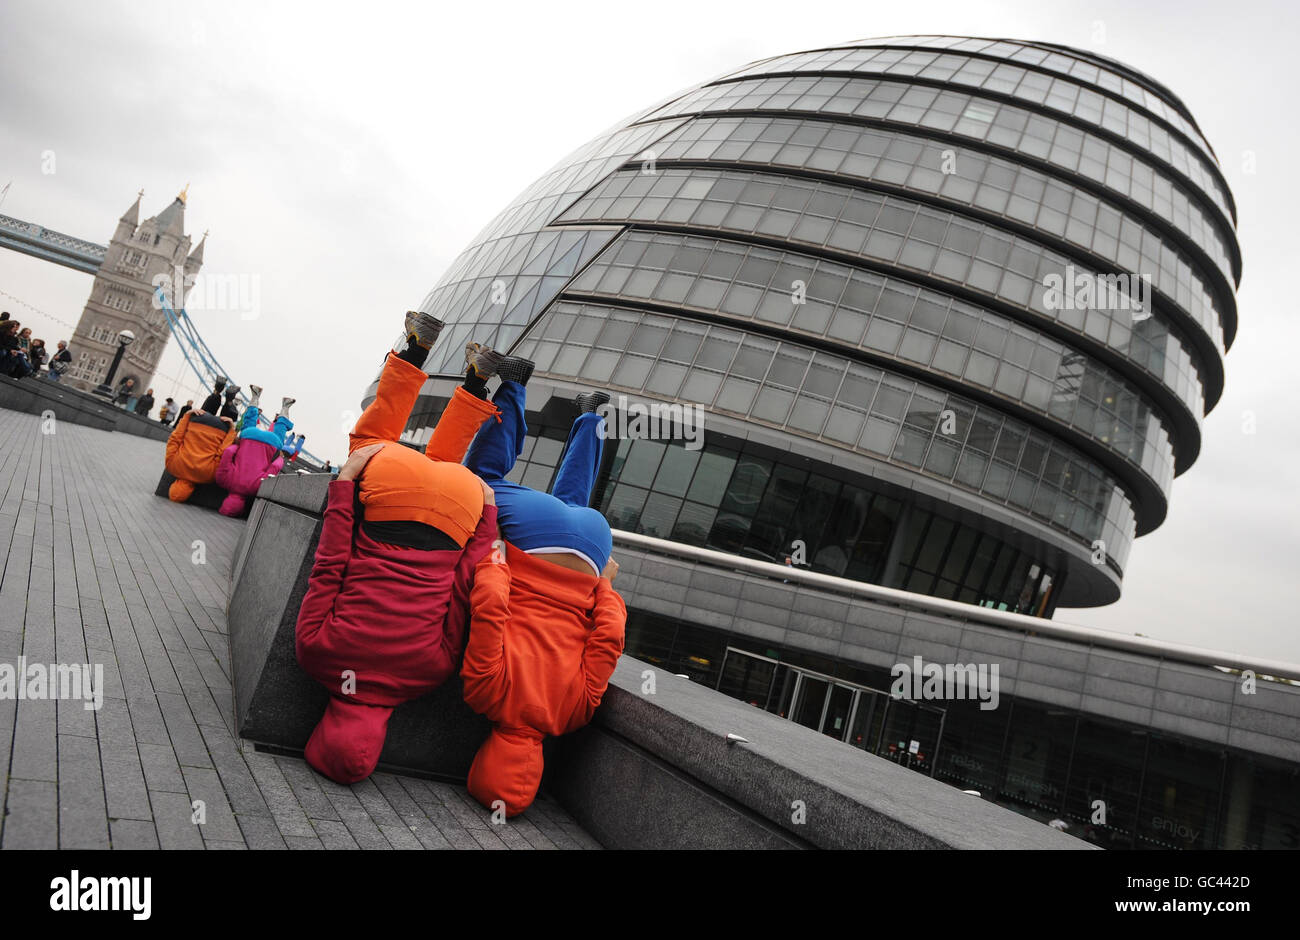 Bodies in Urban Spaces a human artwork by Austrian artist Willi Dorner, near the Mayor's Office on London's Southbank today. The 'moving body trail' featuring 24 performers is taking place in the Tower Bridge area until Sunday. Stock Photo